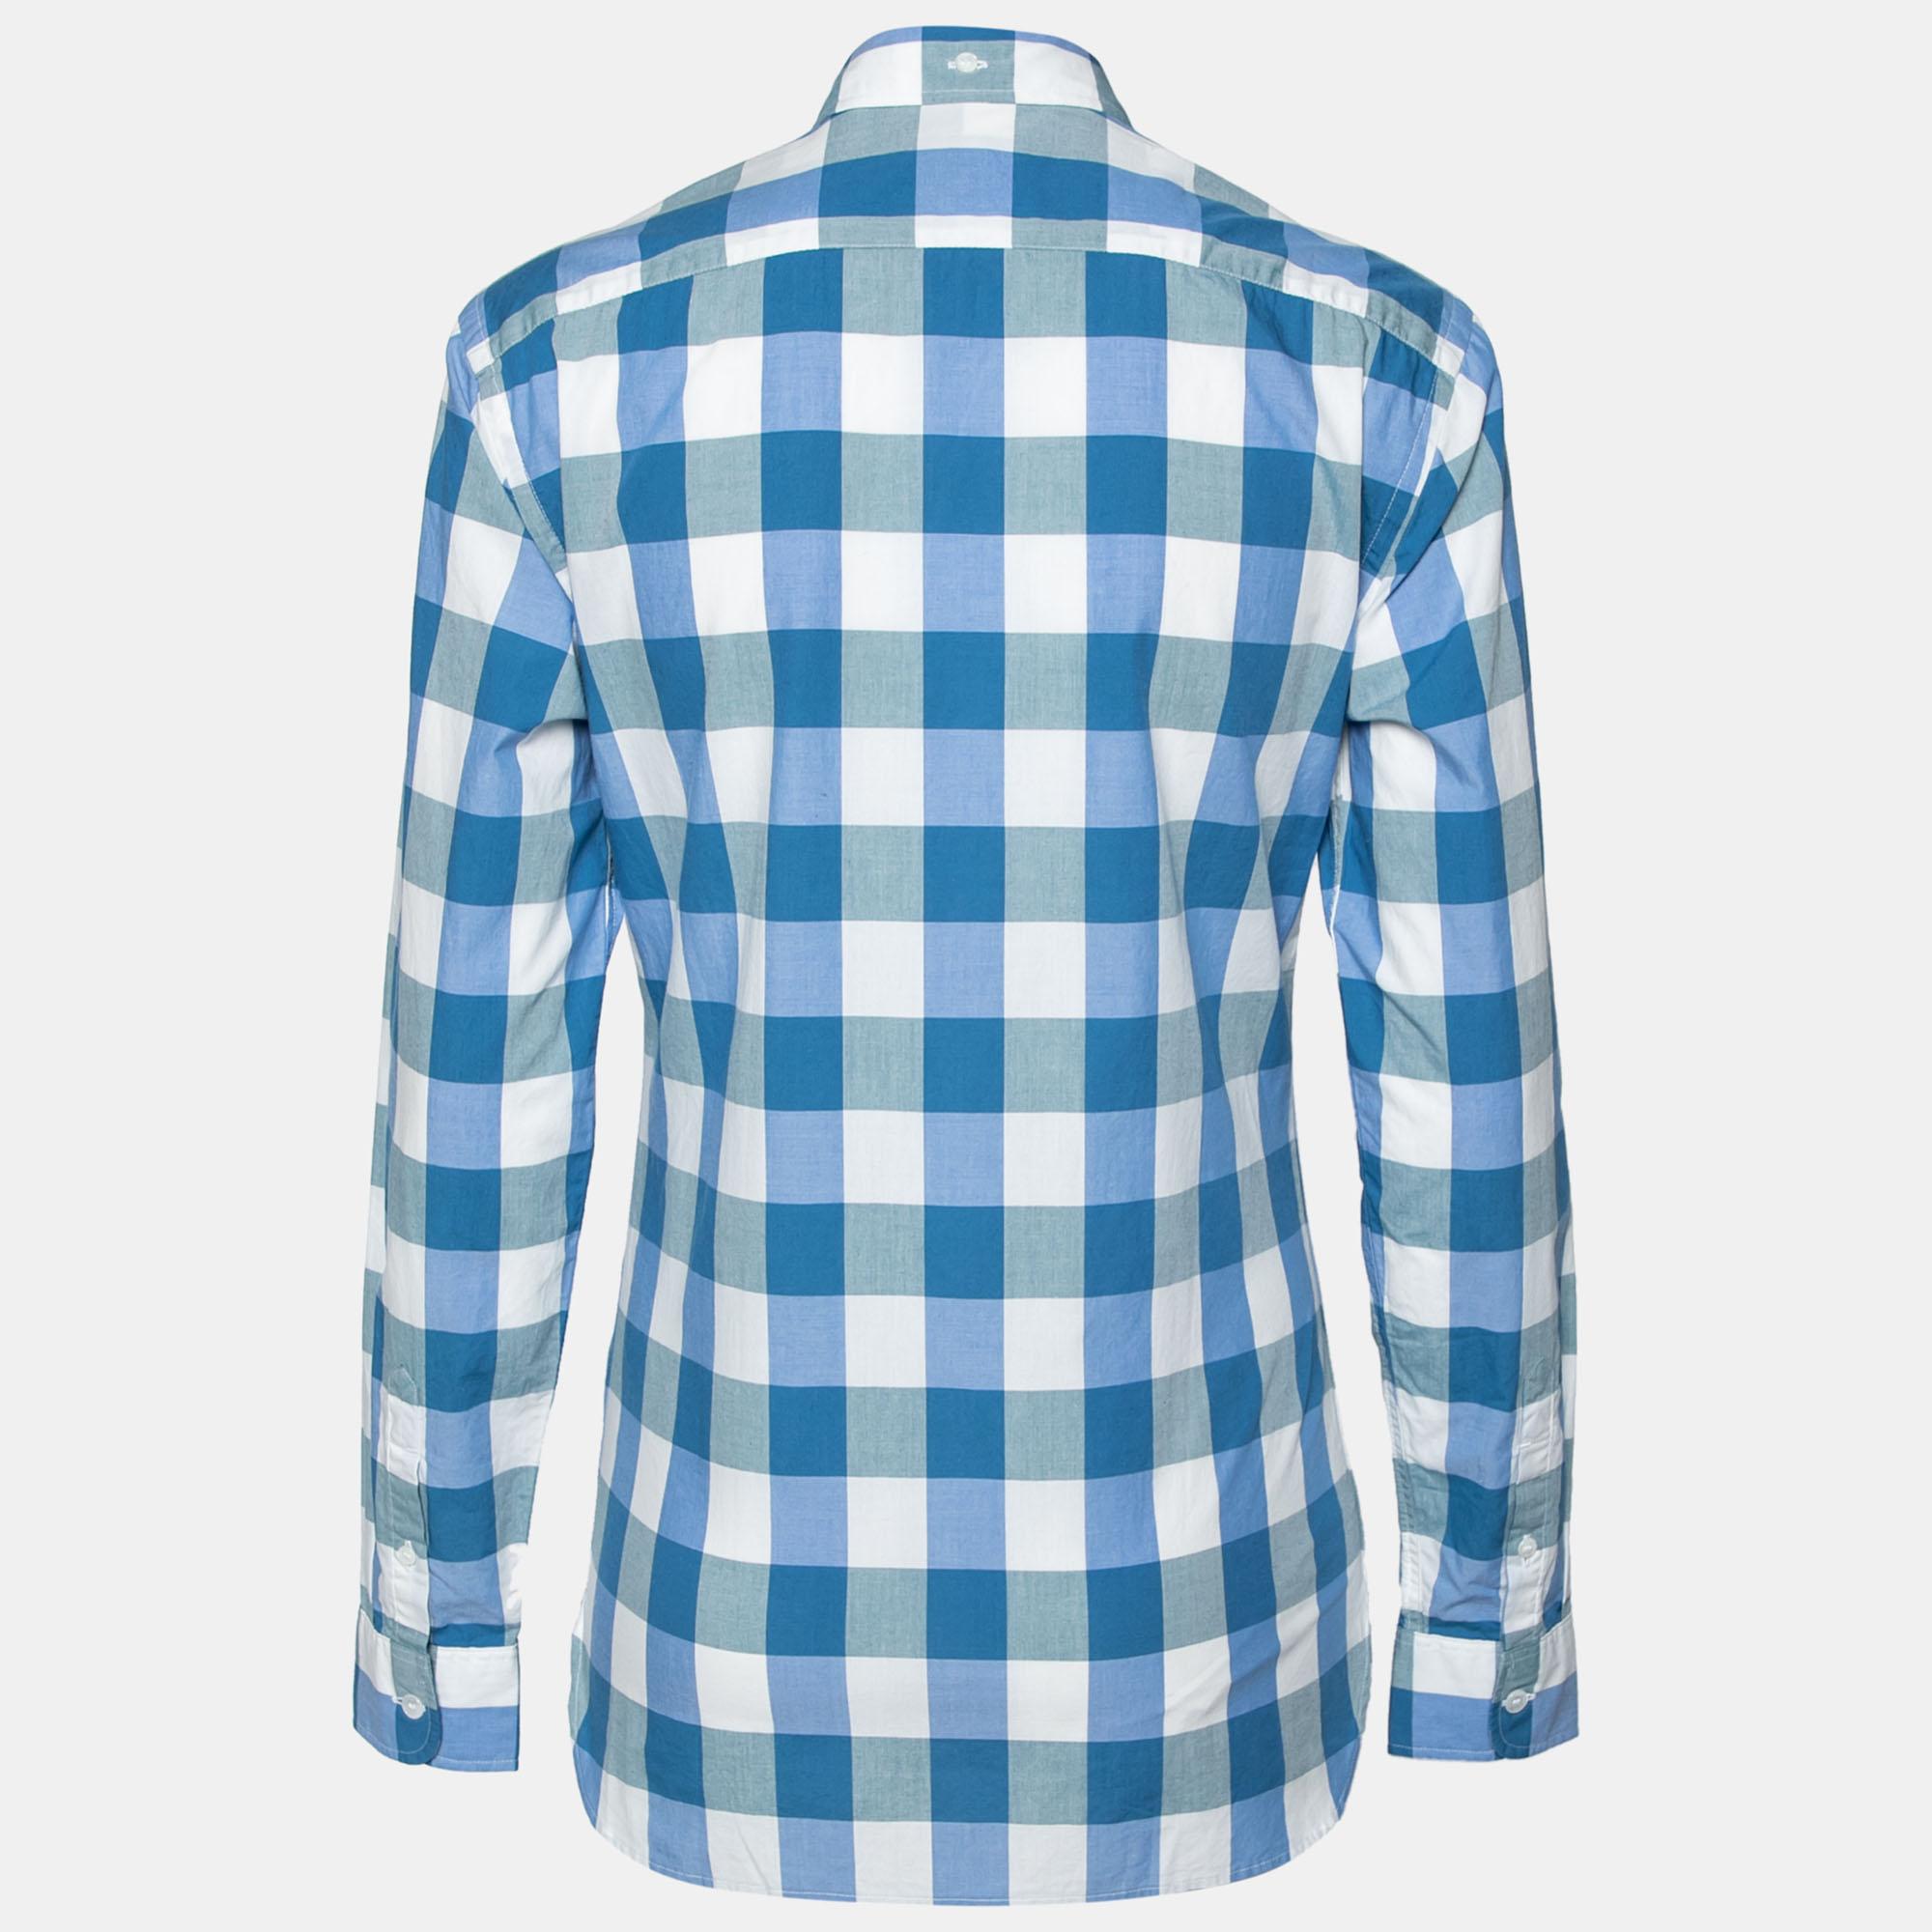 Look your best by adorning this classy Burberry shirt. Made from check-patterned cotton, it is paired with long sleeves with a buttoned cuff, a fine collar, and front button fastening. Wear it with pants or jeans for a sophisticated